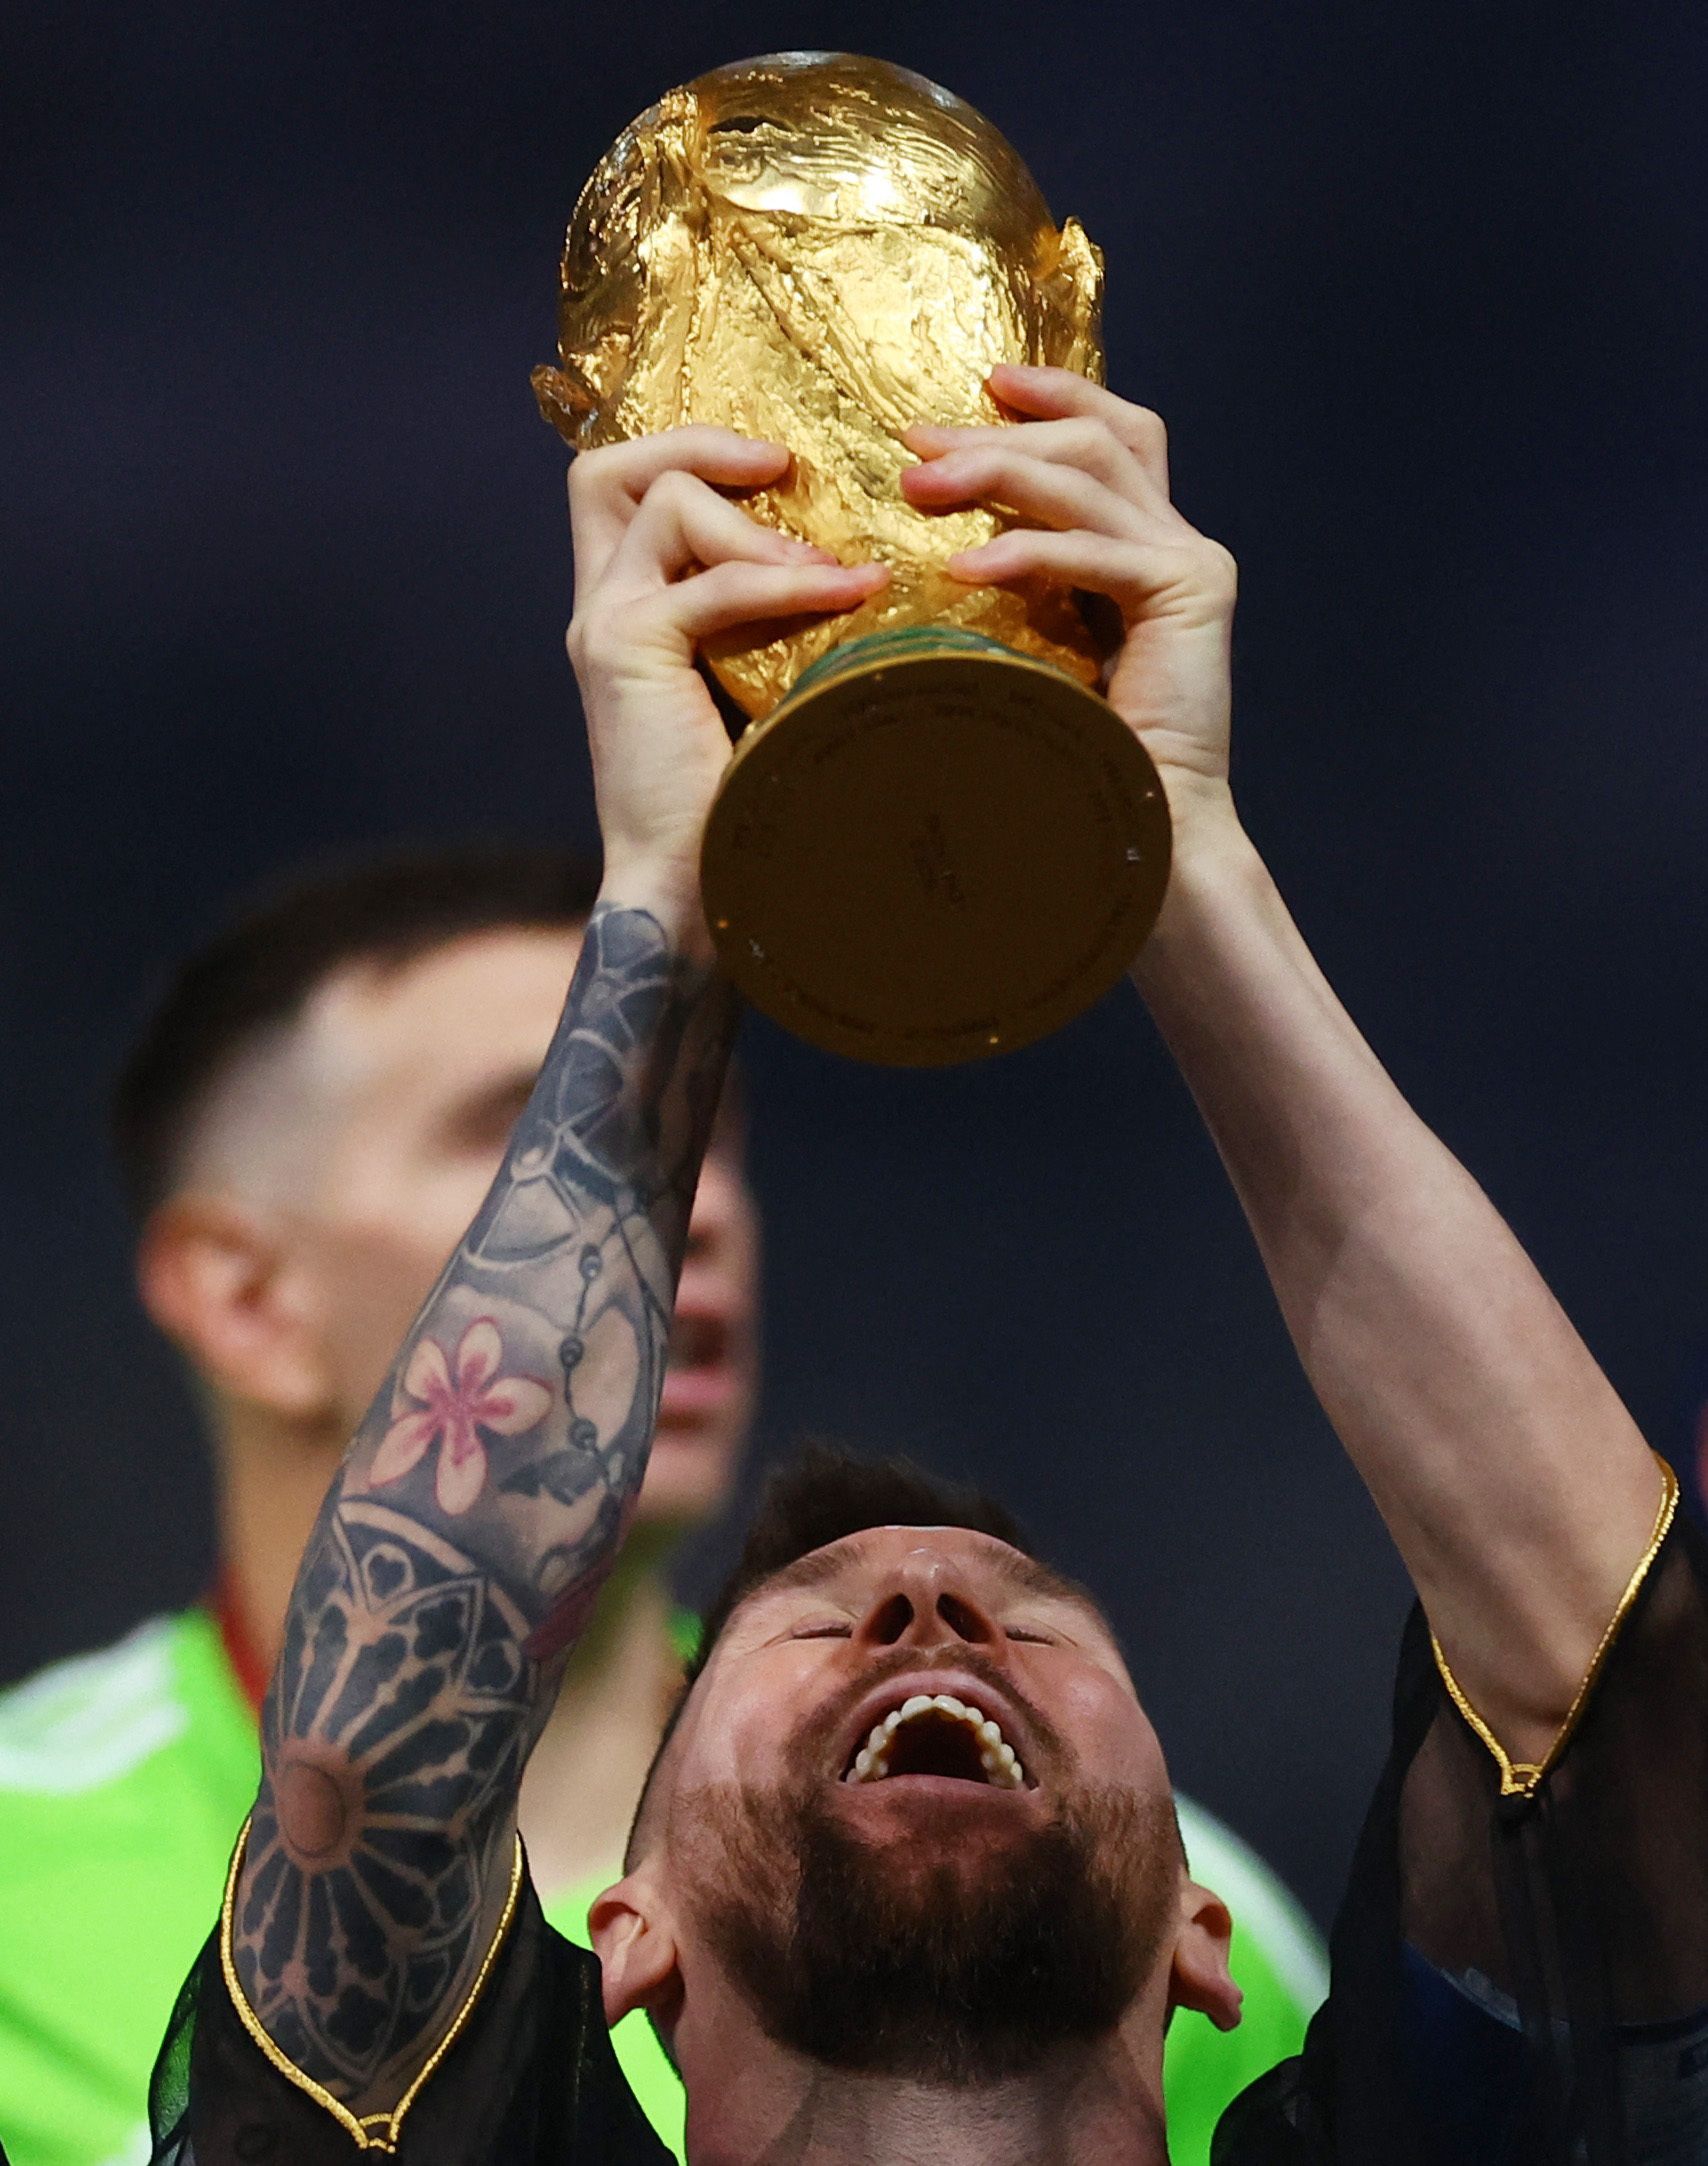 Twitter thread claims Leo Messi's World Cup win was 'rigged'